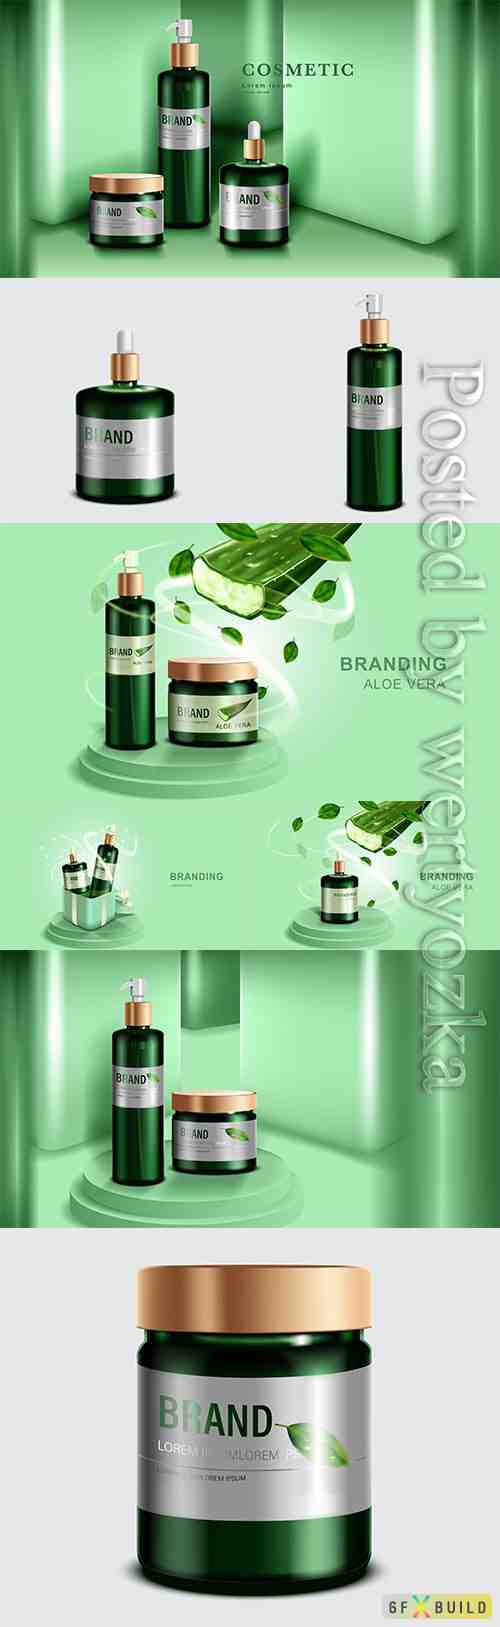 Cosmetics or skincare product, green bottle and green wall background